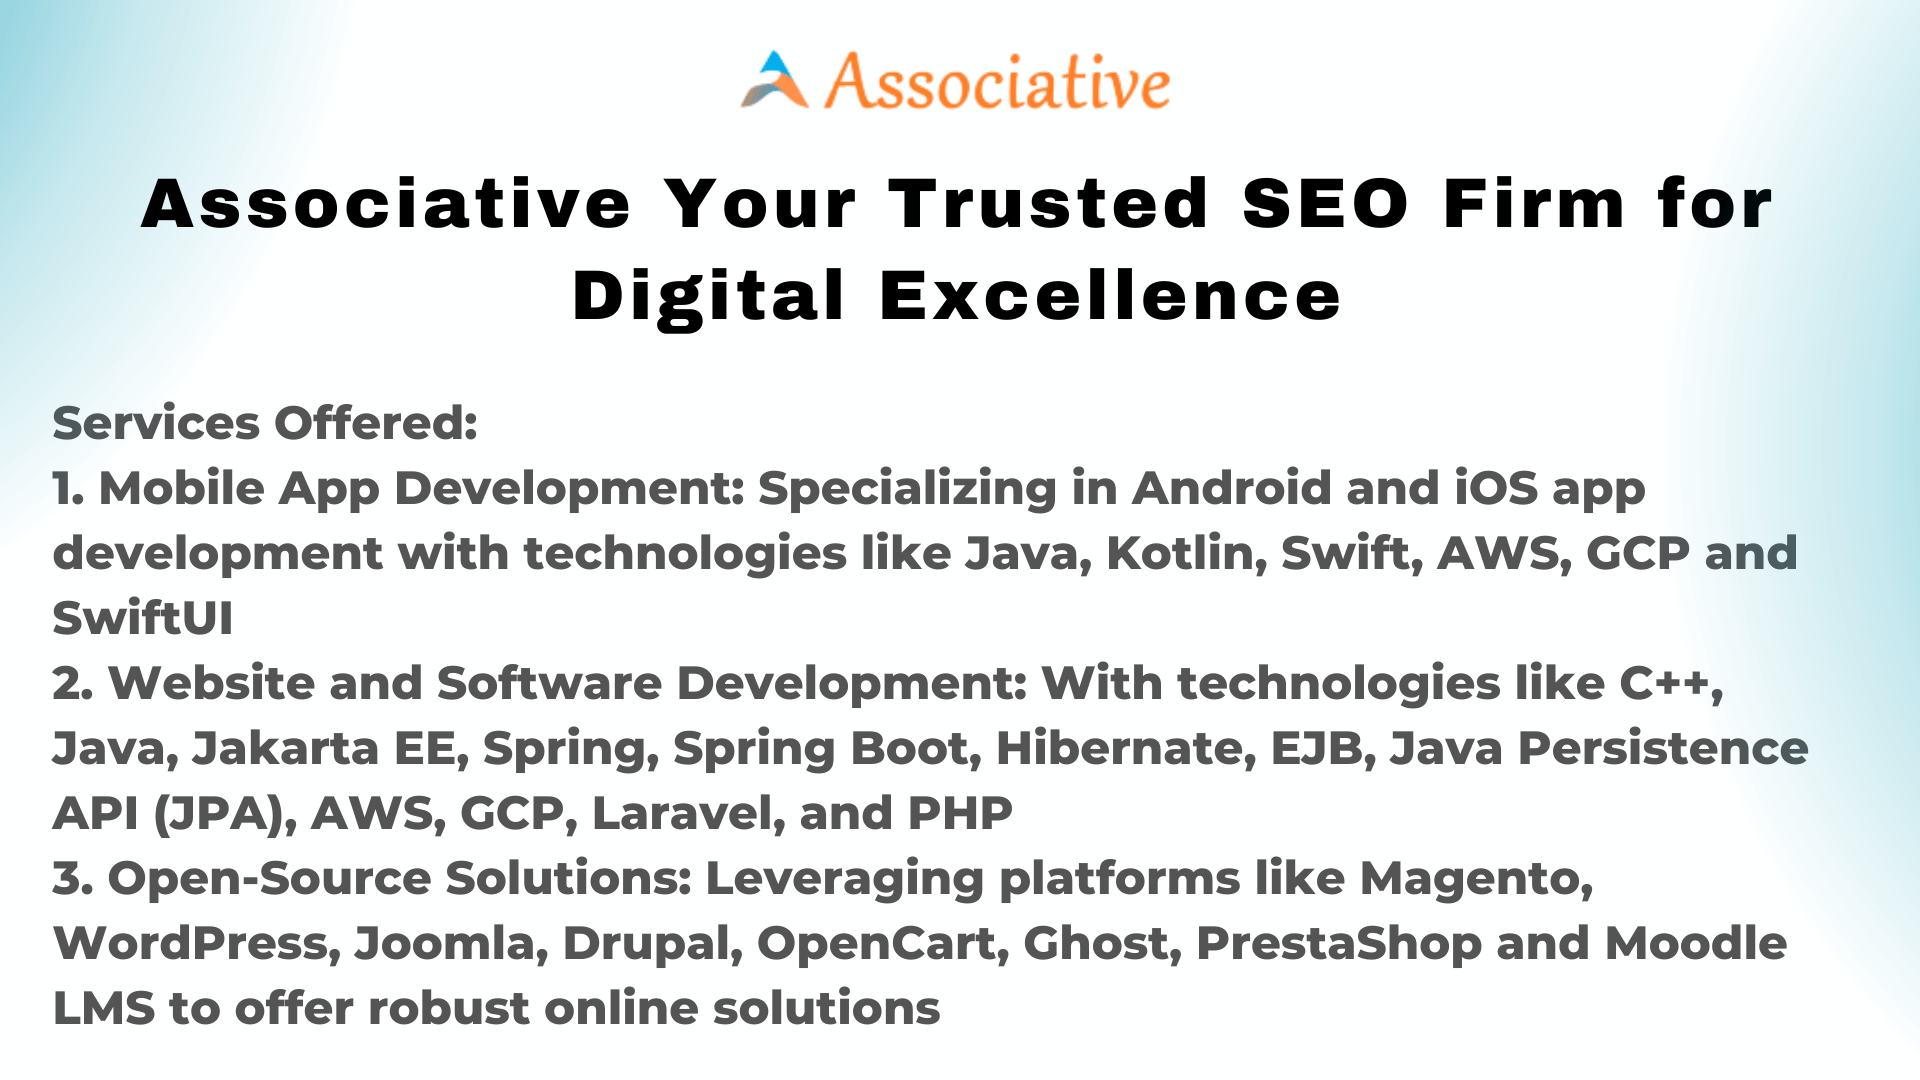 Associative Your Trusted SEO Firm for Digital Excellence